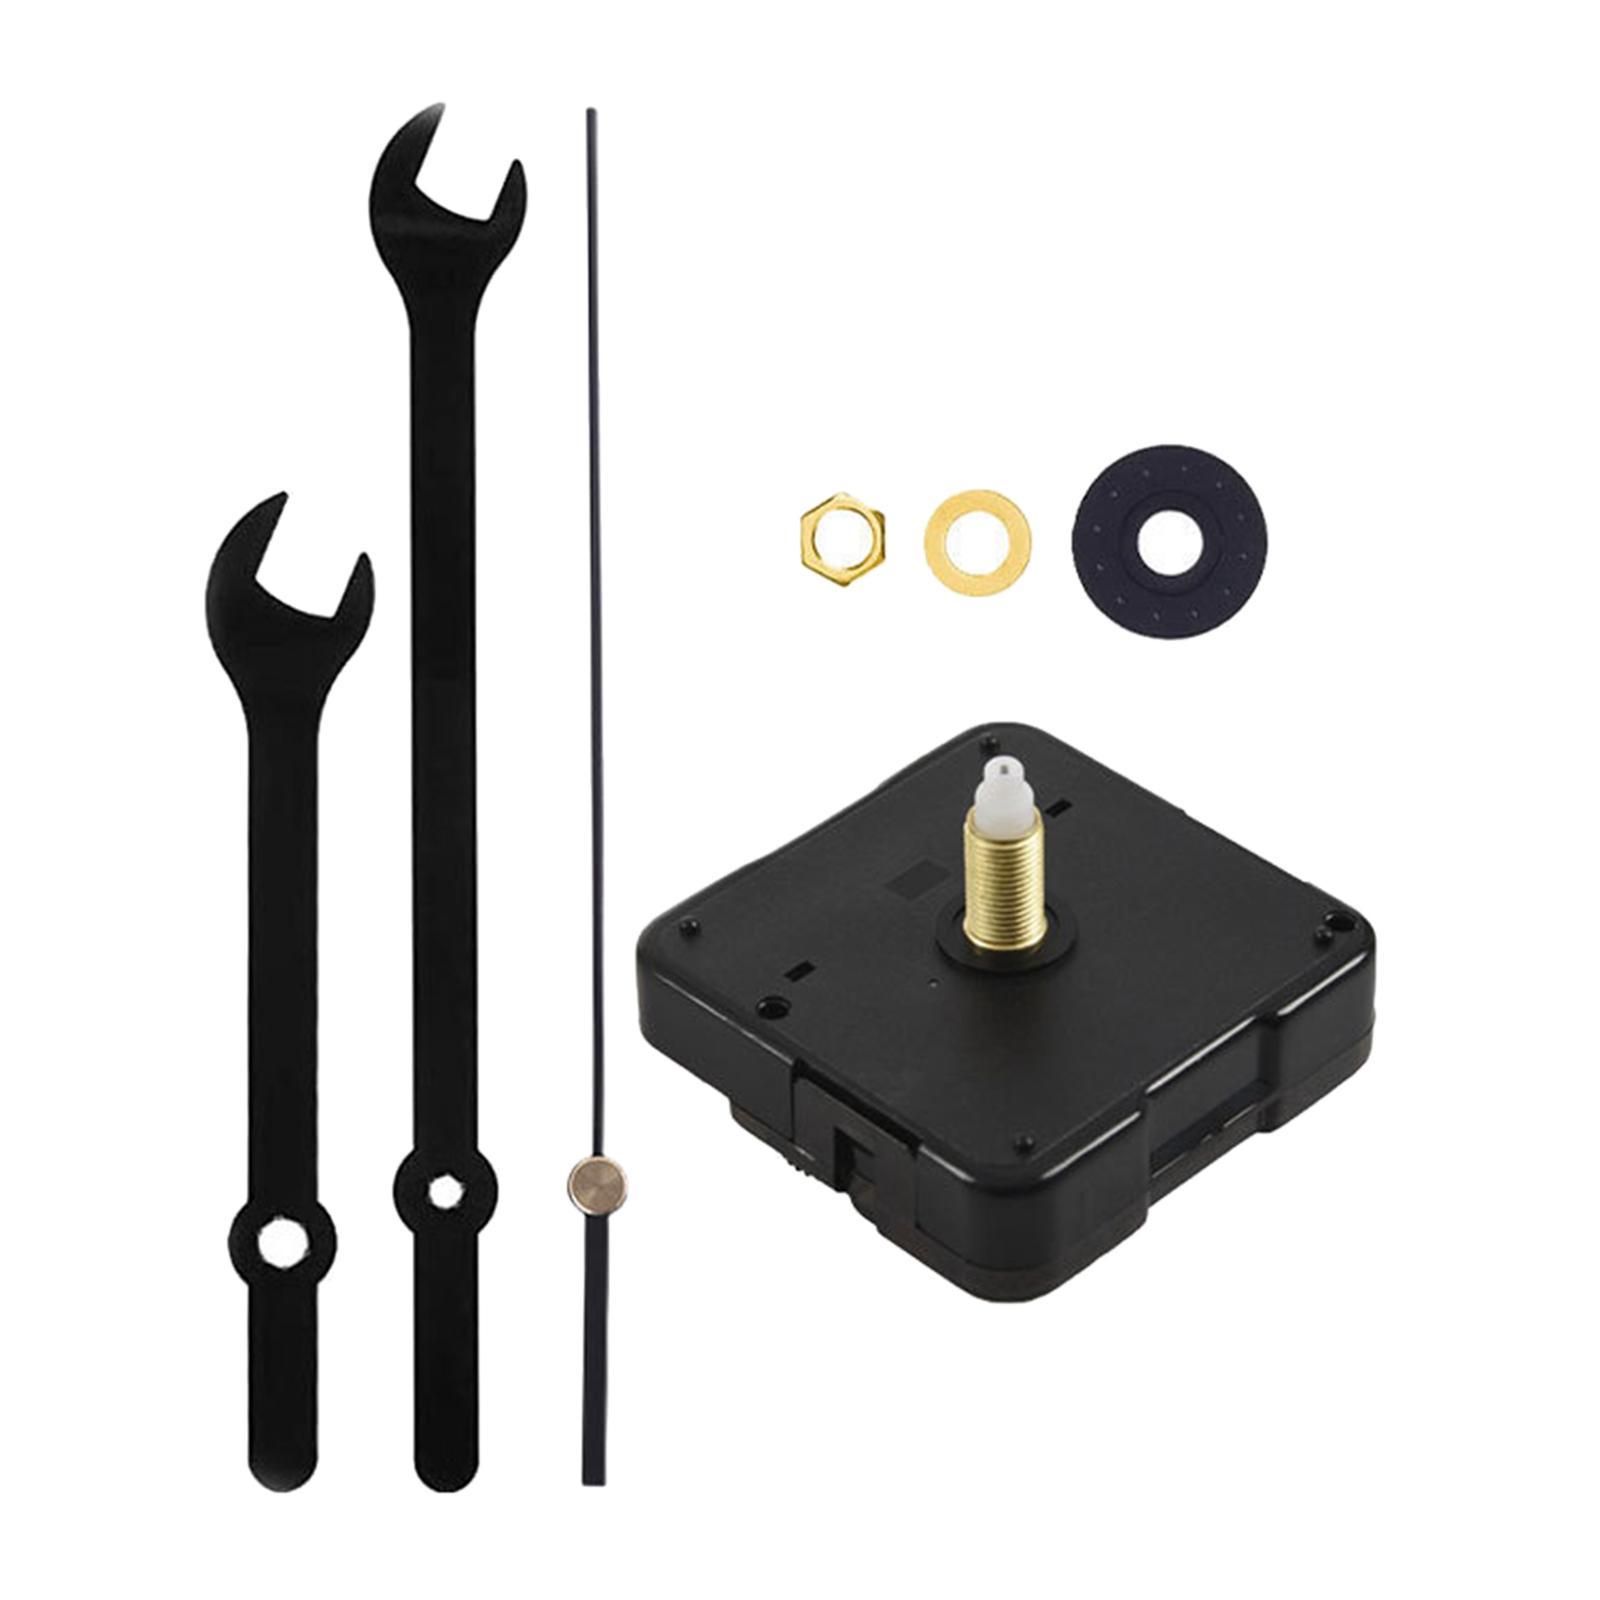 Wall Clock Movement Mechanism High  Kit for DIY Replacement Parts